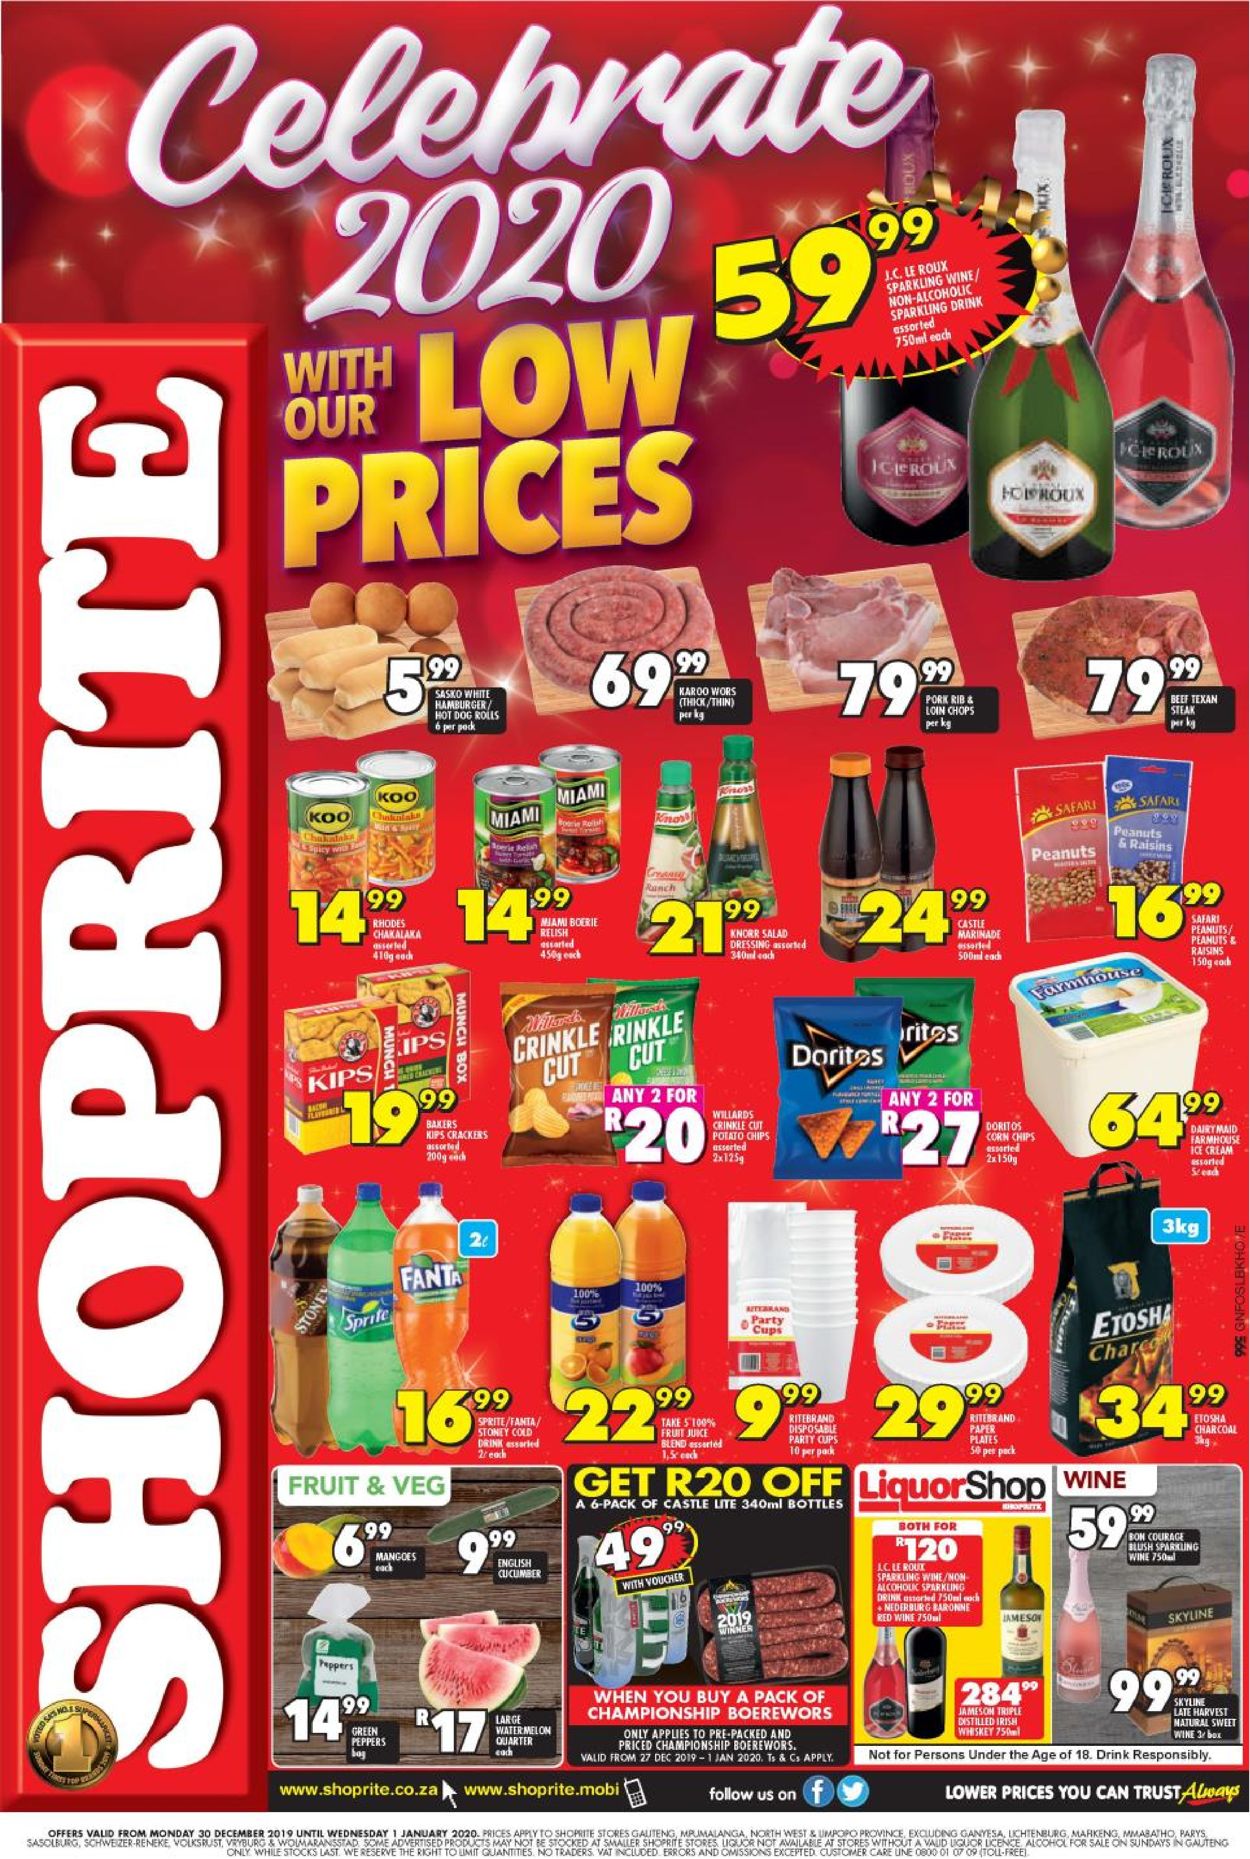 Shoprite New Year Catalogue 19/20 Current catalogue 2019/12/30 2020/01/01